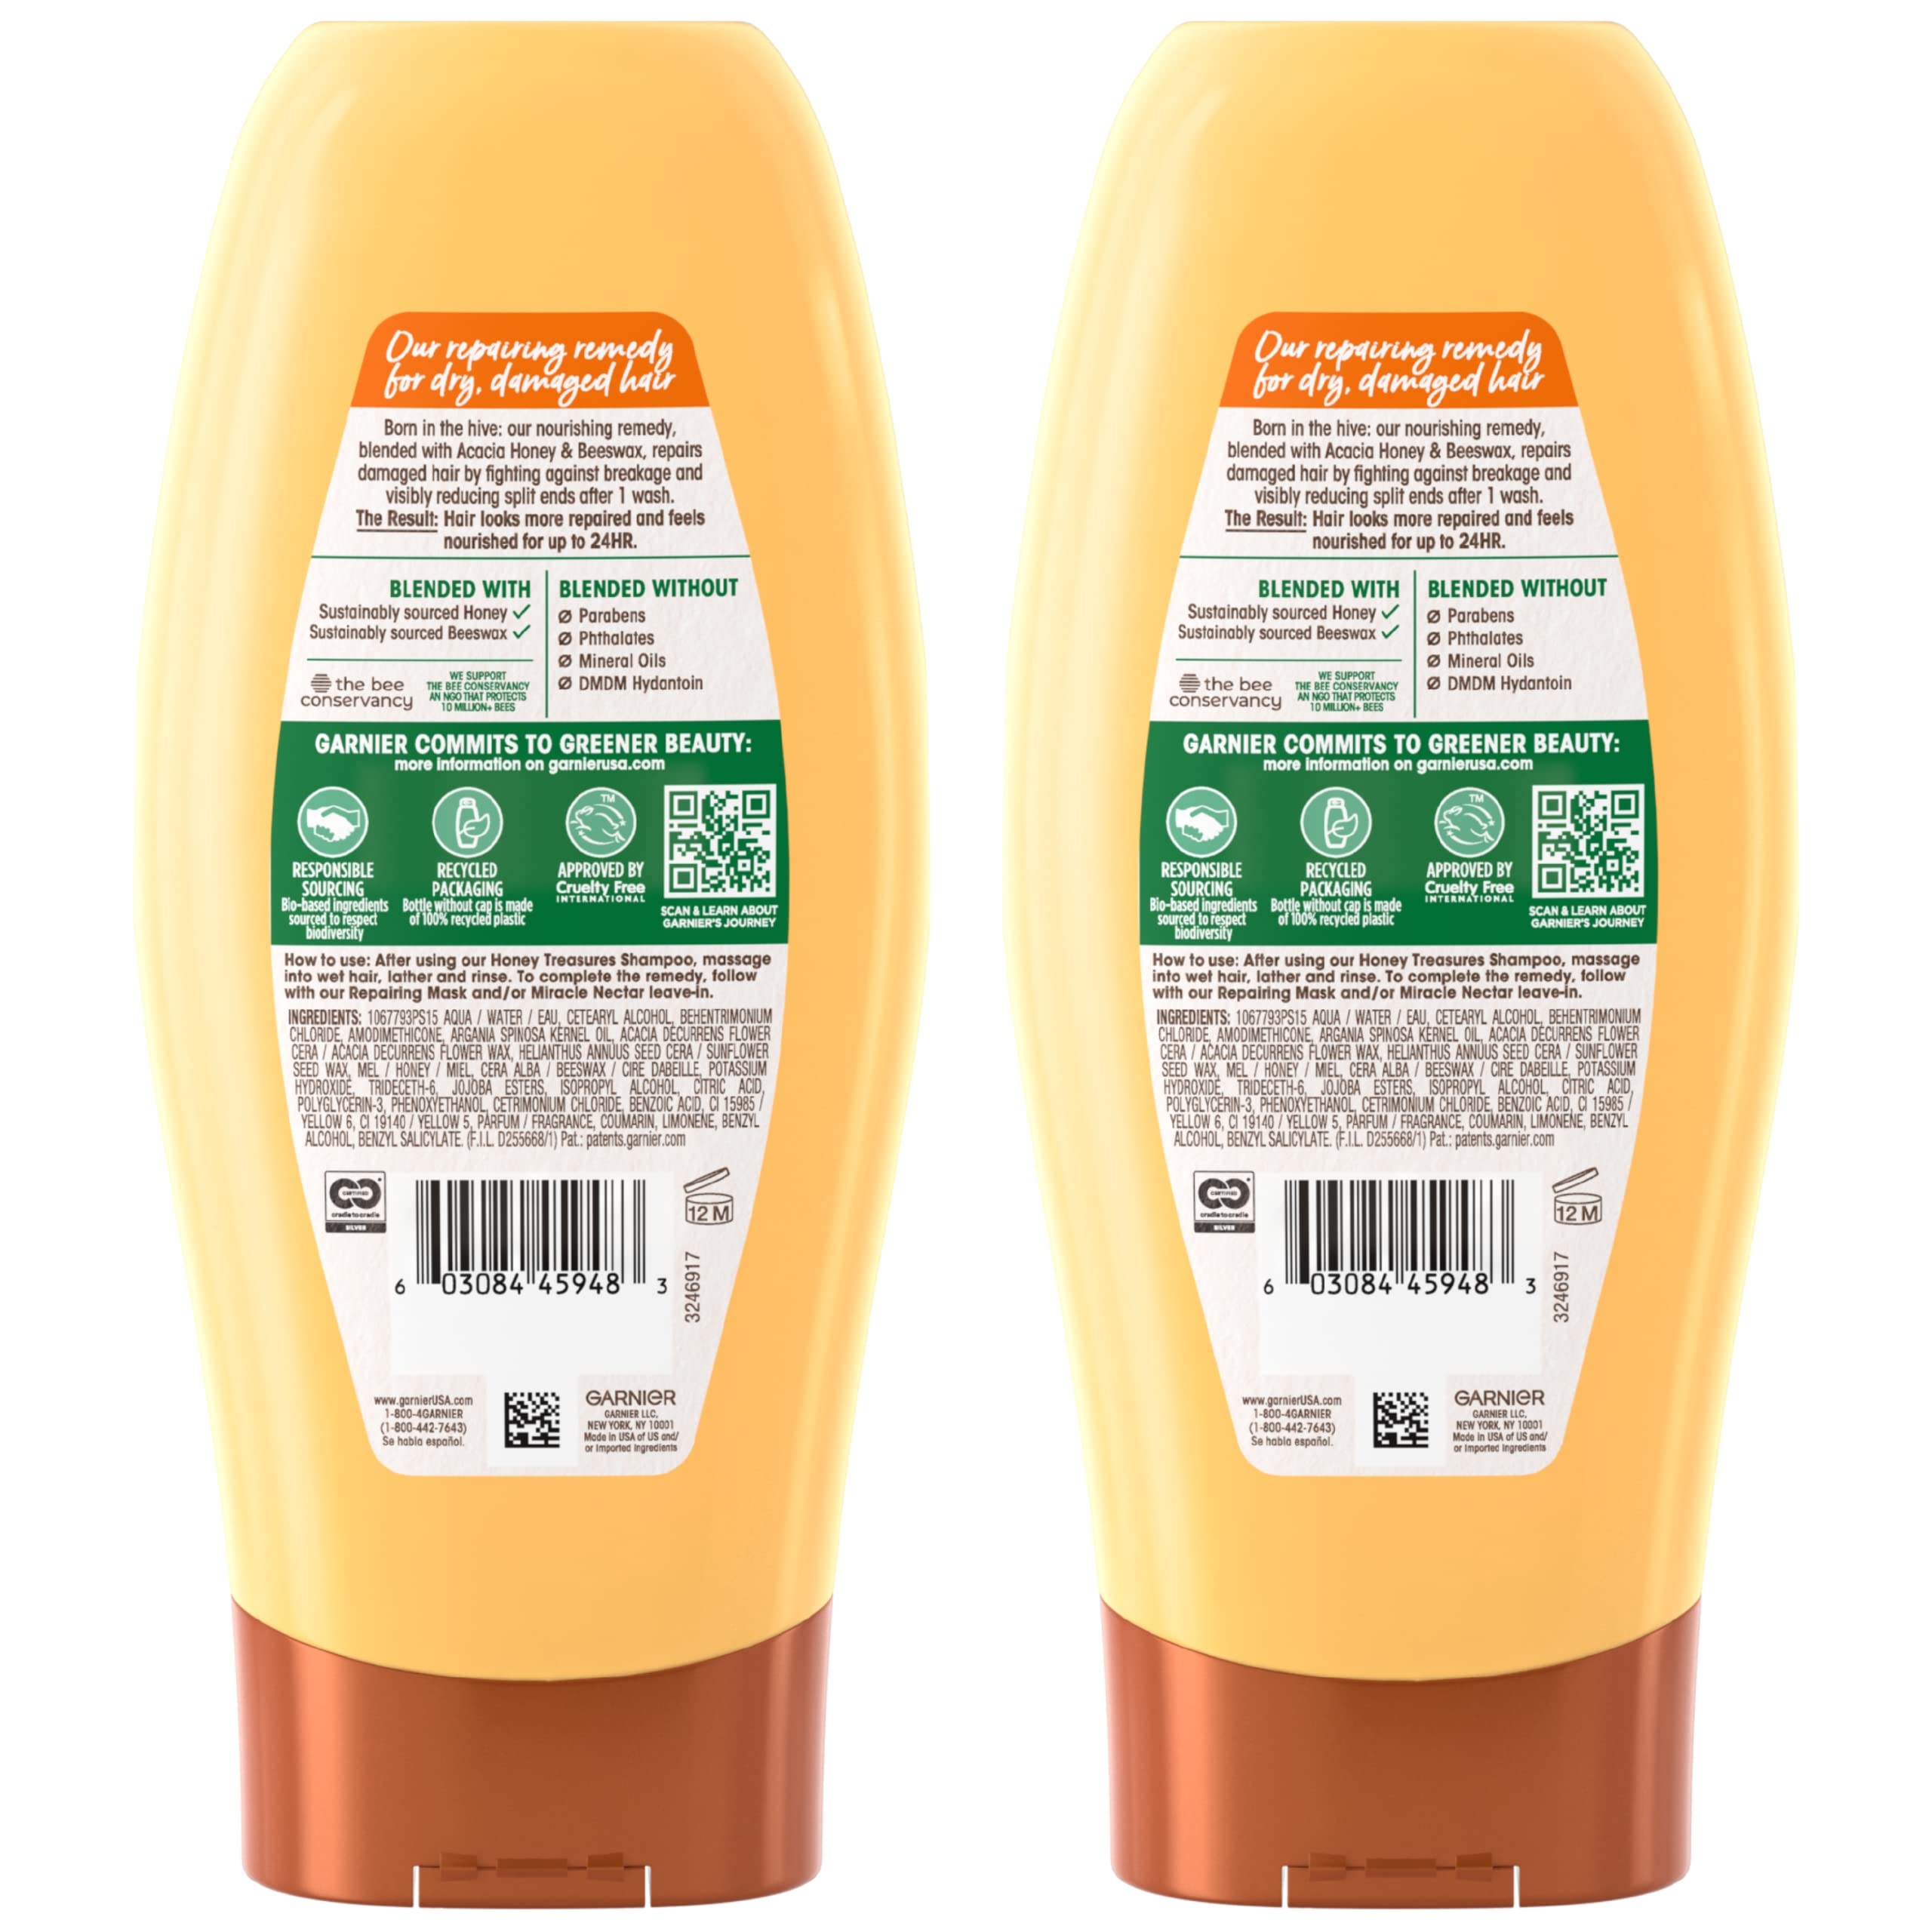 Garnier Whole Blends Honey Treasures Repairing Conditioner, for Dry, Damaged Hair, 22 Fl Oz, 2 Count (Packaging May Vary)